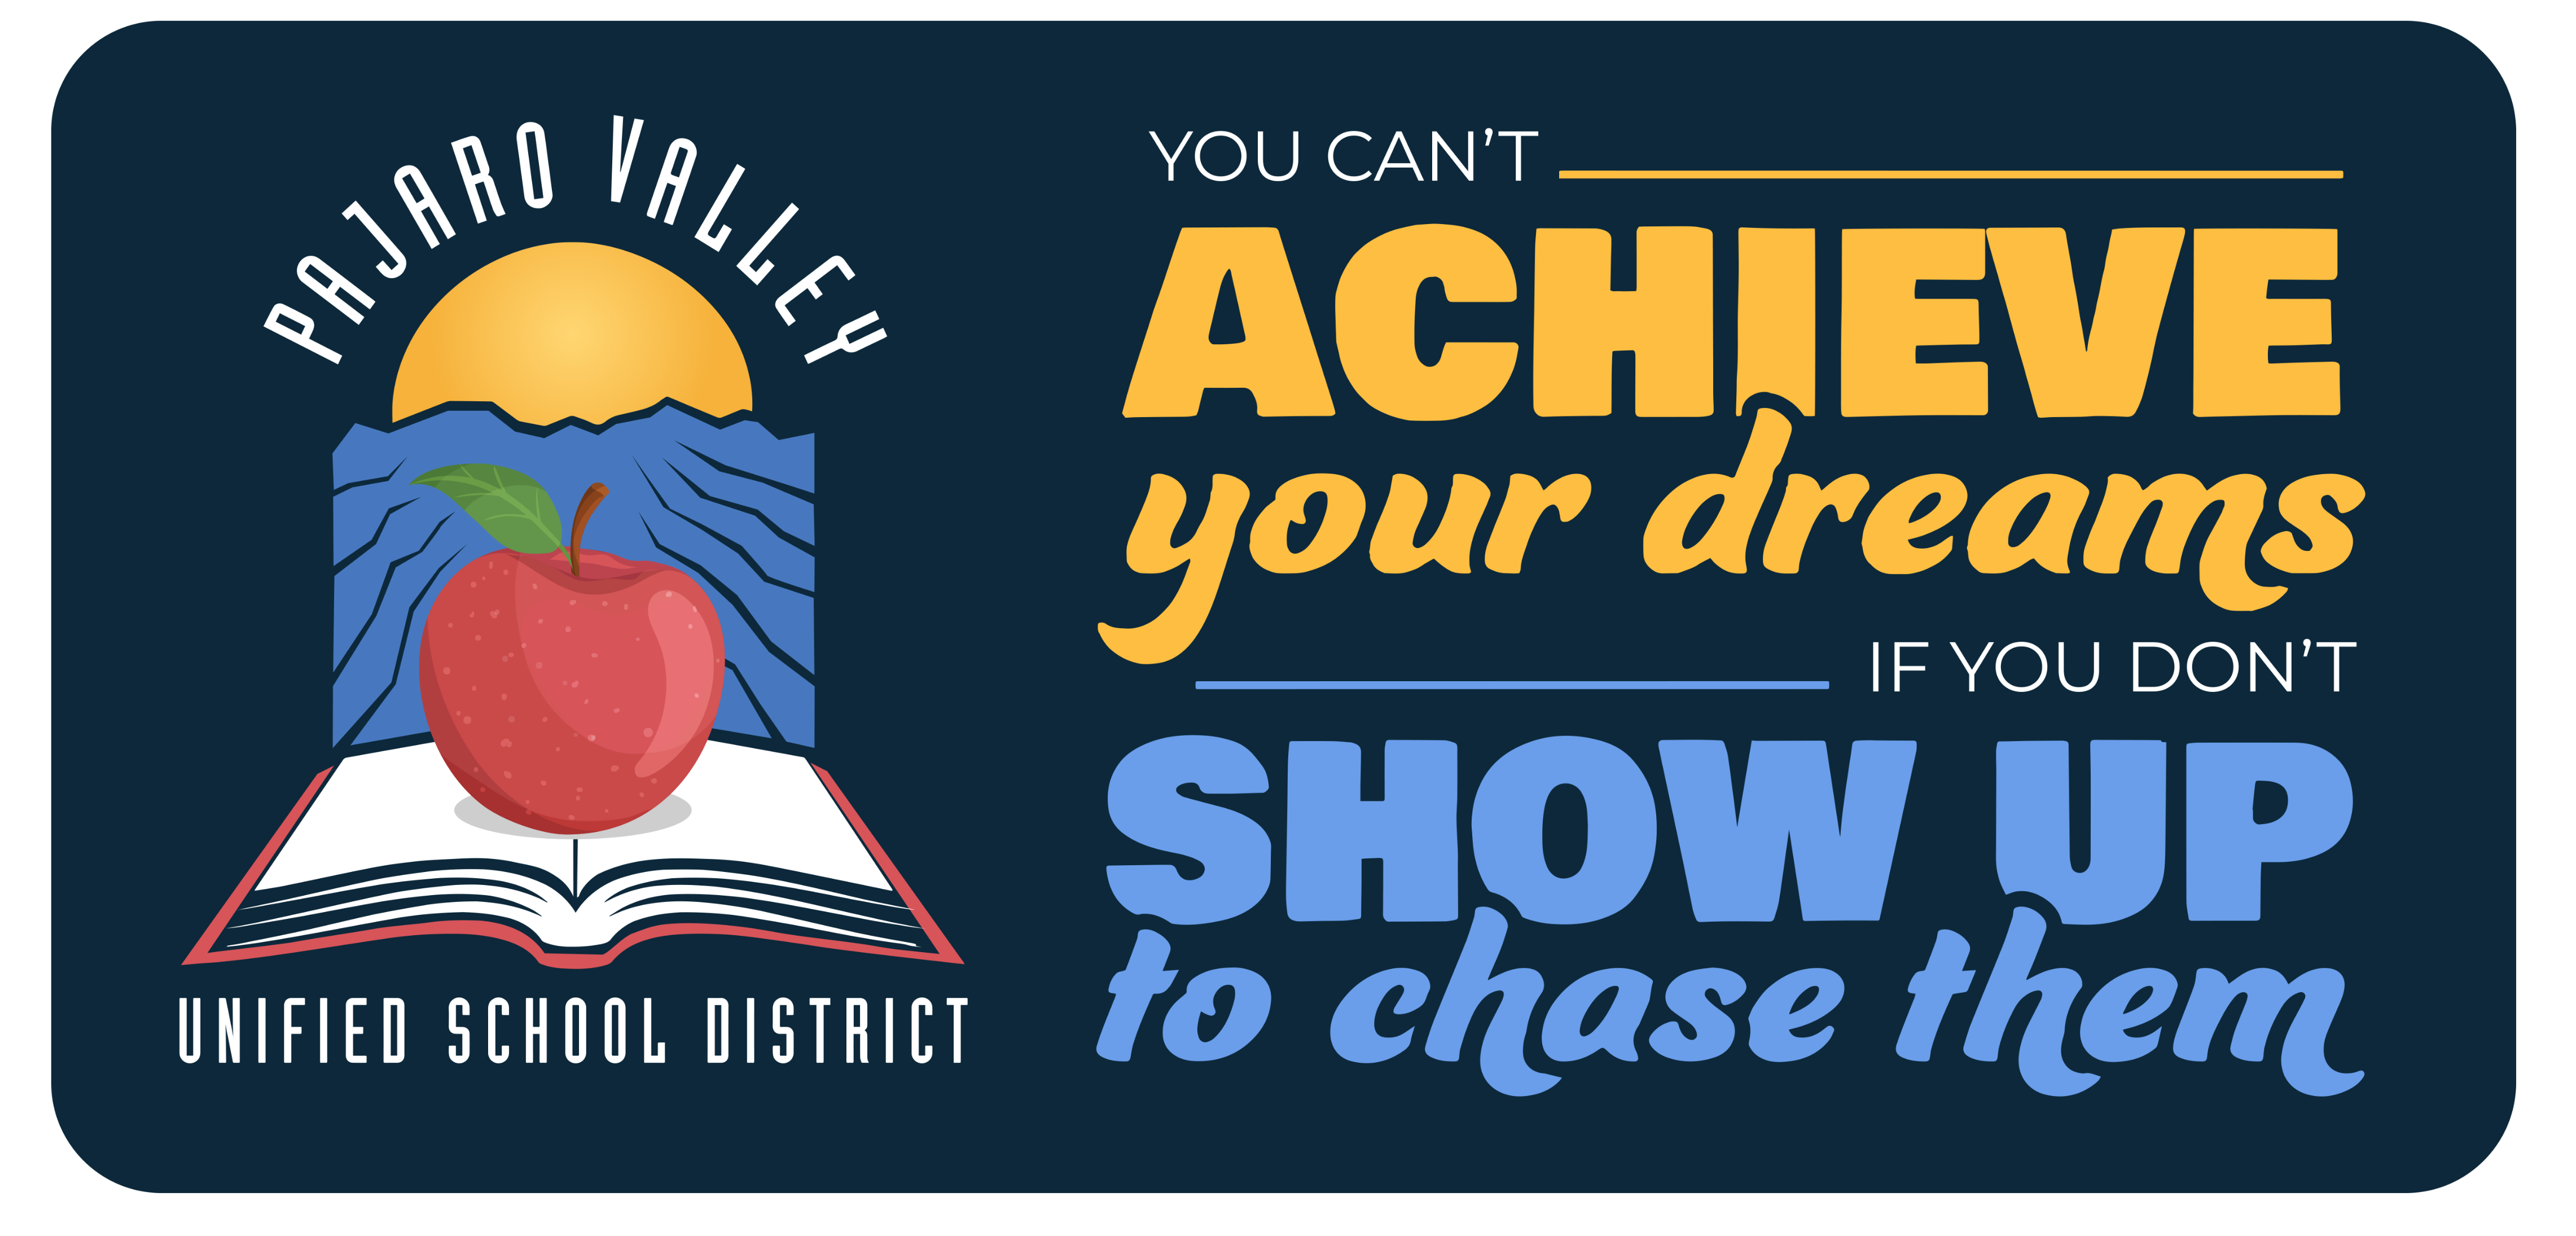 You can't achieve your dreams if you don't show up to chase them